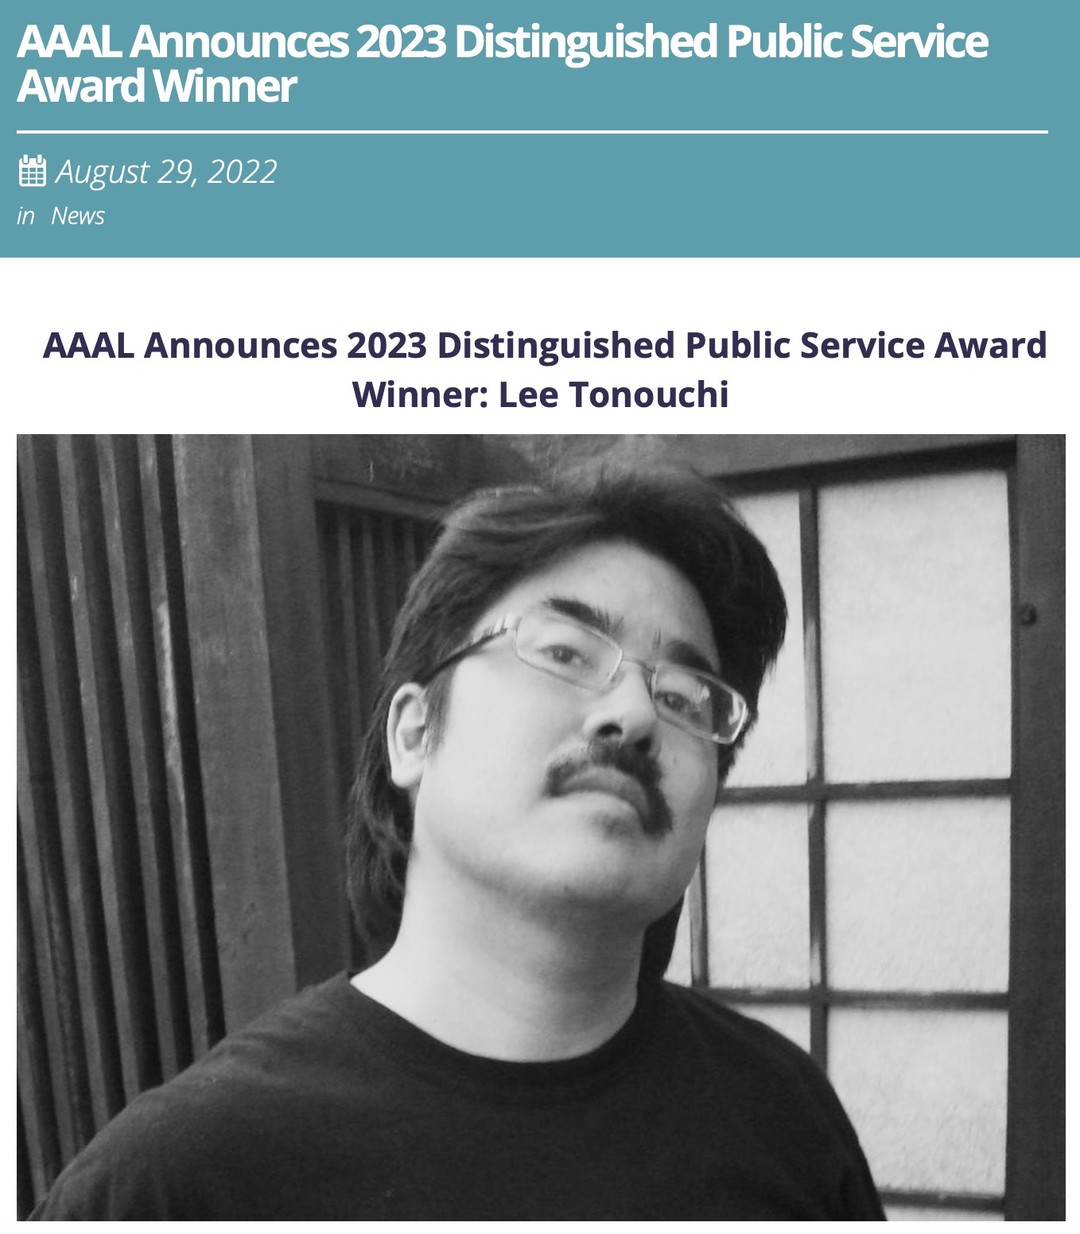 Quoted directly from AAAL:
The AAAL Distinguished Public Service Award (DPSA) recognizes individuals outside of the field of applied linguistics -- writers, journalists, politicians, lawyers, etc. -- whose work (1) raises public awareness of important social issues connected to language and (2) makes exceptional contributions to promotion of multilingualism, linguistic social and justice, and language-related human rights. This year’s recipient is Lee Tonouchi. Lee is a passionate language advocate in Hawaiʻi, where he is known as “Da Pidgin Guerilla” due to his support for the use of Pidgin, the creole language of Hawaiʻi.

Lee has published five books in Pidgin which not only tell engaging, humorous, and poignant stories, but which also invite readers to deeply reflect on the role of Pidgin and its treatment in society by families, teachers, naysayers, and people in power. His first book, Da Word (2001) was a collection of his short stories, including a story about his own revelation that Pidgin is often not considered a language by many people since its words cannot be found in a (English) dictionary, an oft-cited (and misguided) source of linguistic authority.

Lee is an accomplished writer, public speaker, community activist, and educator. Above all, he is a warrior for Pidgin speakers. In Hawaiʻi, as in many creole contexts, Pidgin has been positioned as a form of “broken English” and as a language of the working class that keeps people from climbing the socioeconomic ladder. Lee has worked to challenge this deficit view of Pidgin head on, through articulating wisdom and wit in Pidgin in his writing and public engagements.

Congratulations, Lee!

https://www.aaal.org/news/2023-distinguished-public-service-award?fbclid=IwAR3aA20Nc7iPaa0hGJIkg-D8iTz1ccMvZ-i0G6sK3CzOAuPHi0pqJbcTrD8##